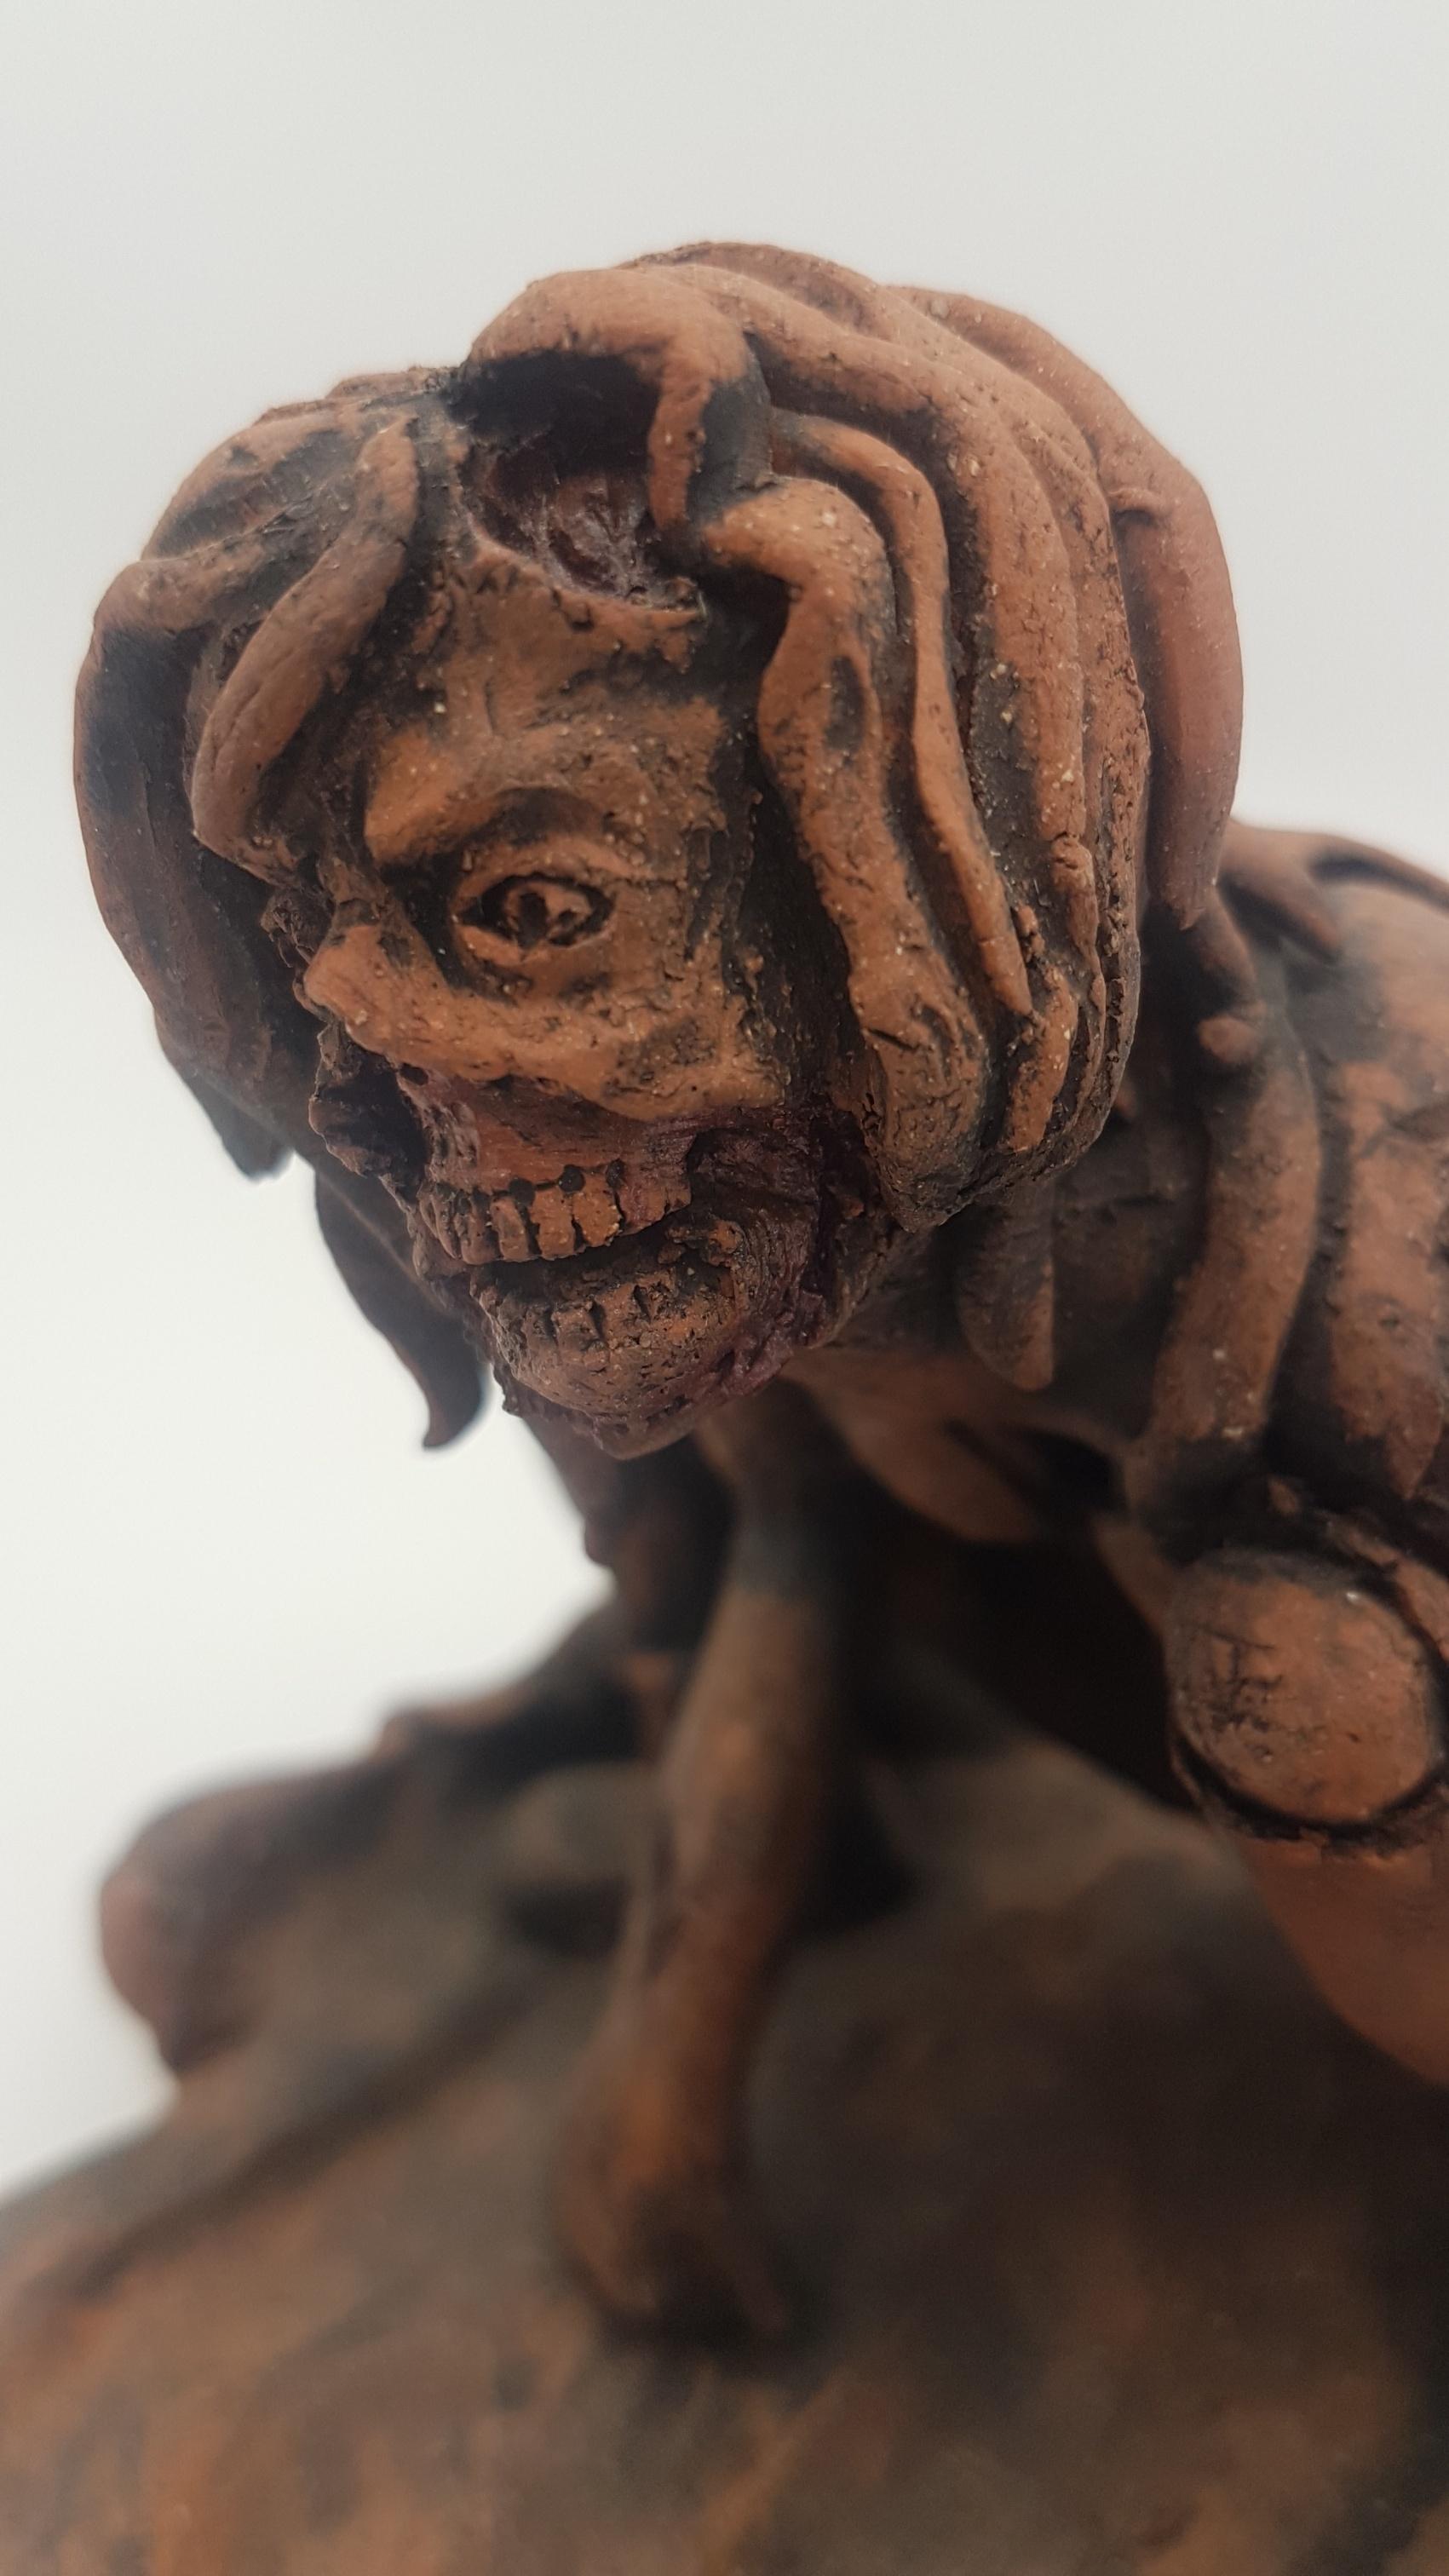 Title : Kneeling Female Zombie
Materials : Wood Fired Porcelain
Date : 2016
Dimensions : 5″ x 6.25″ x 5″
Signed
Gallery COA provided

------------------------

Amy Young Artist Statement:

